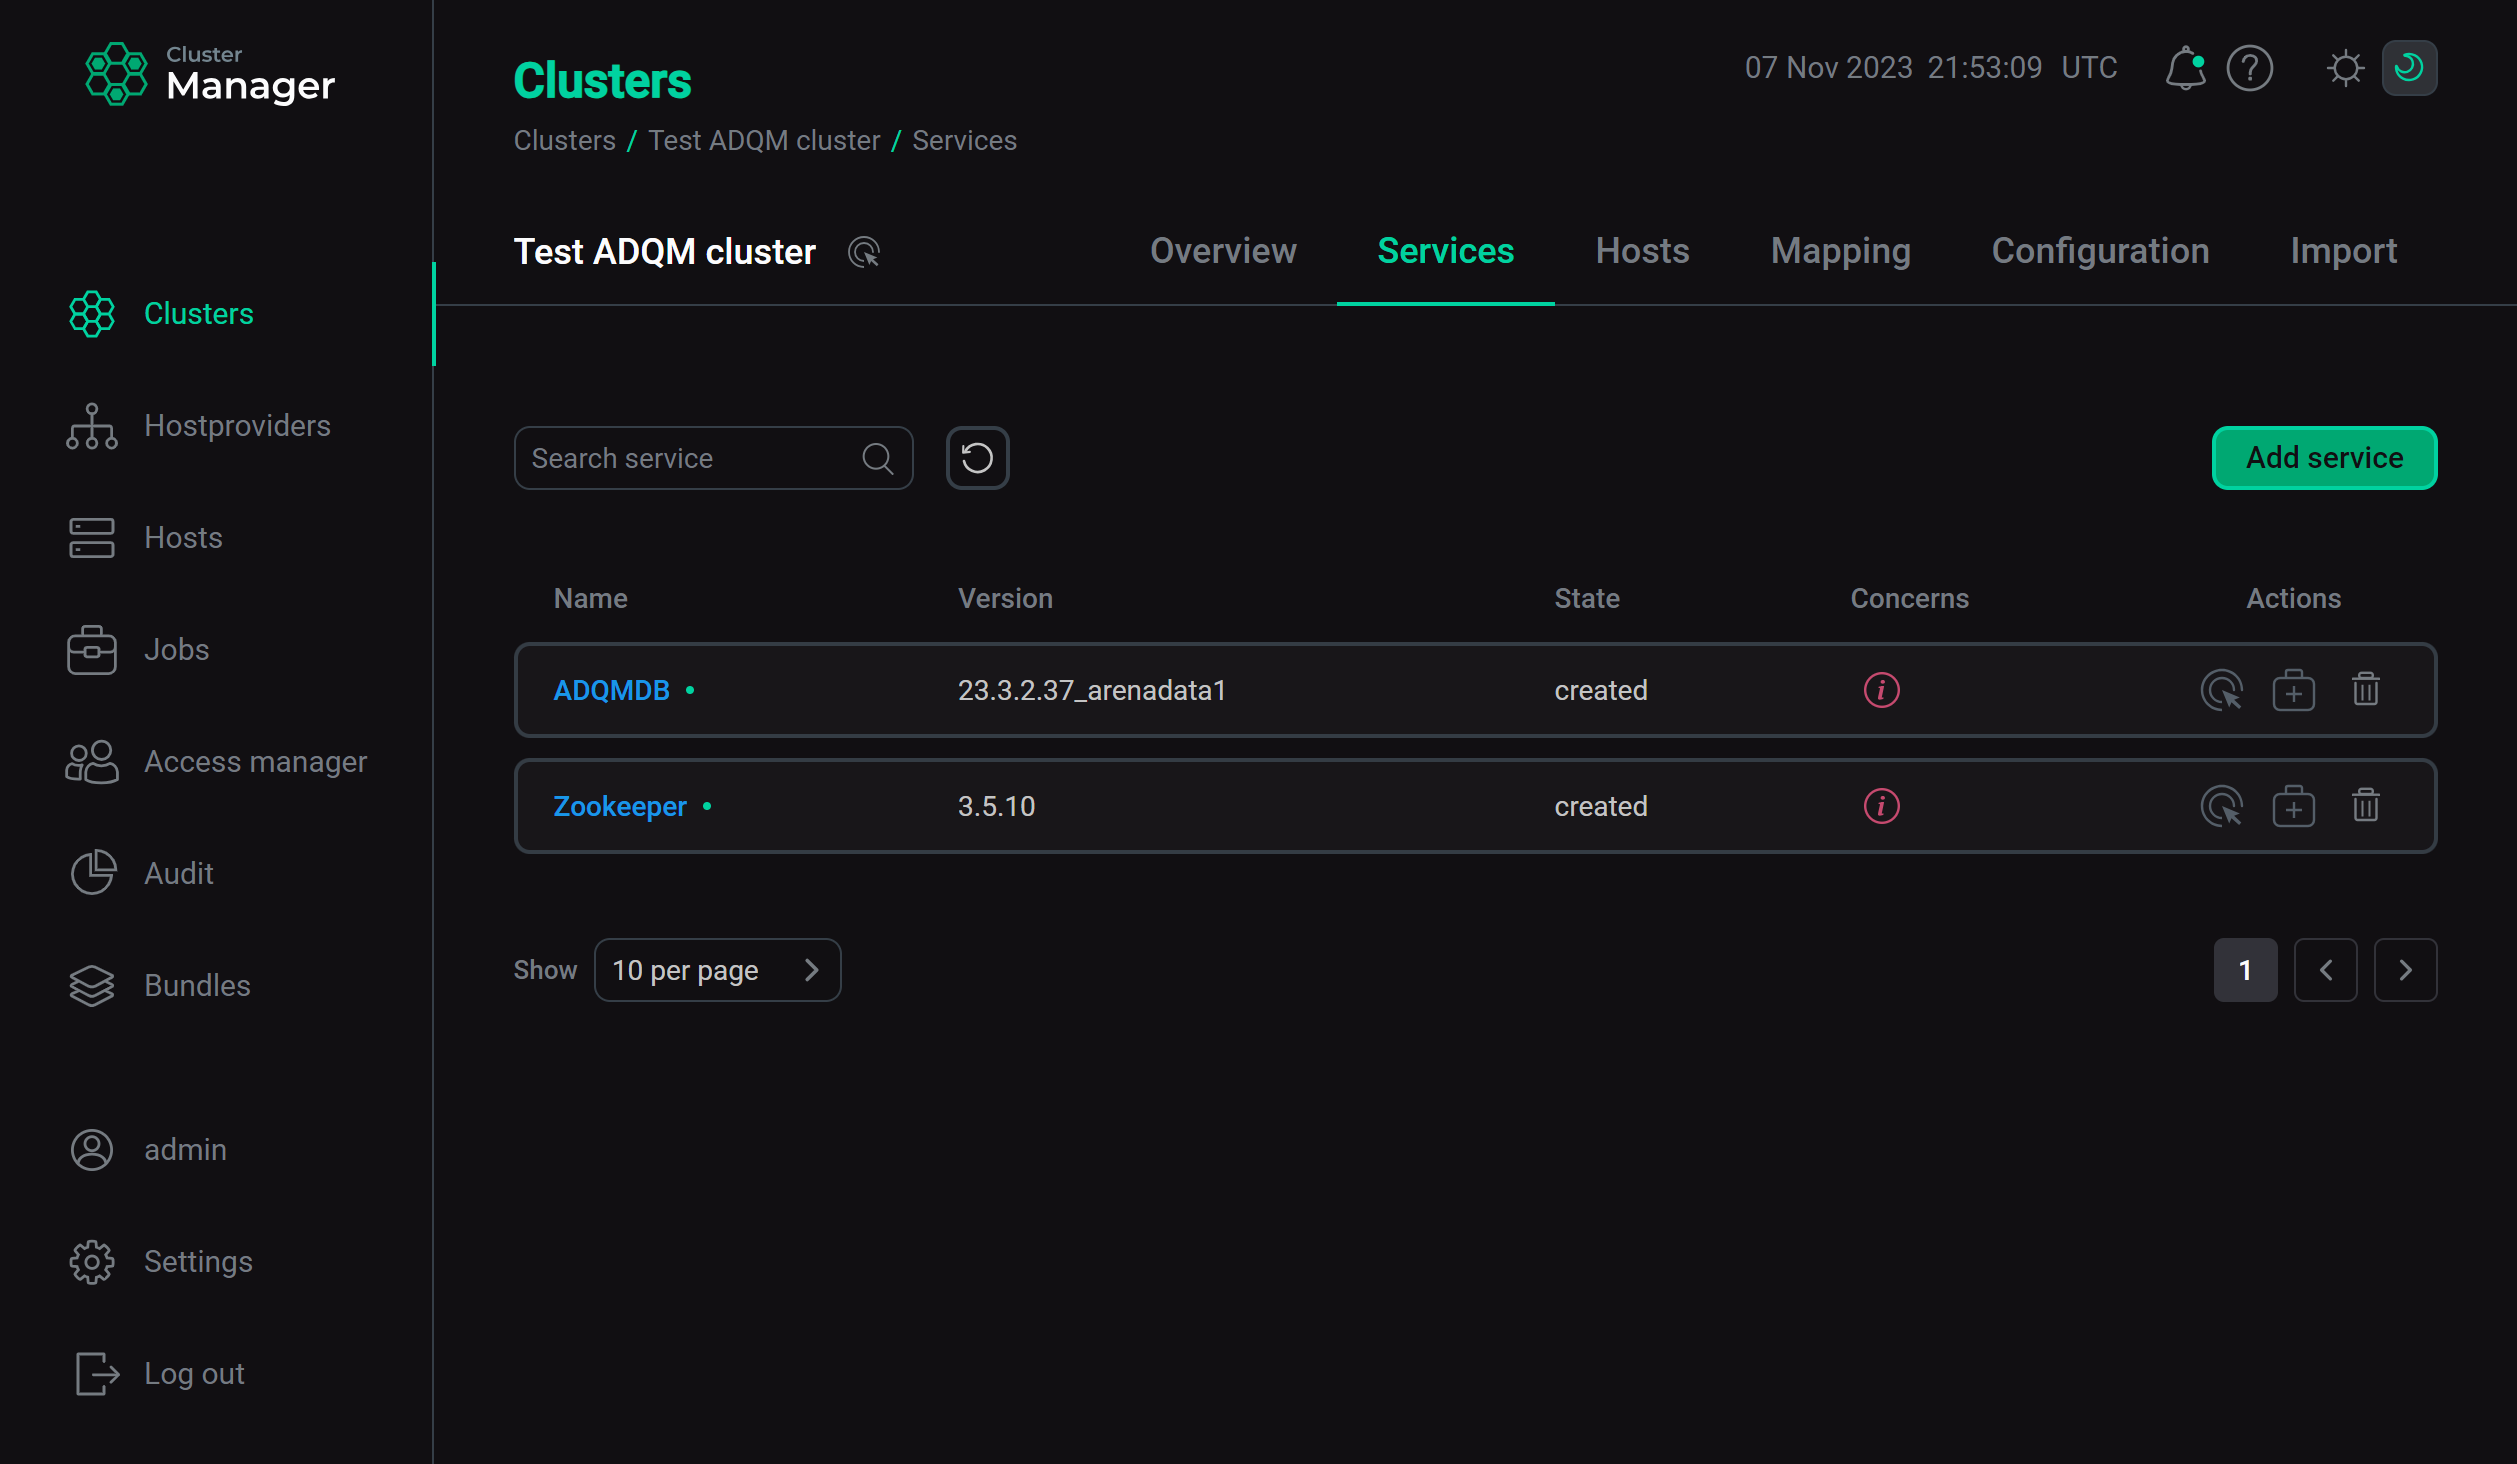 adcm services to cluster 03